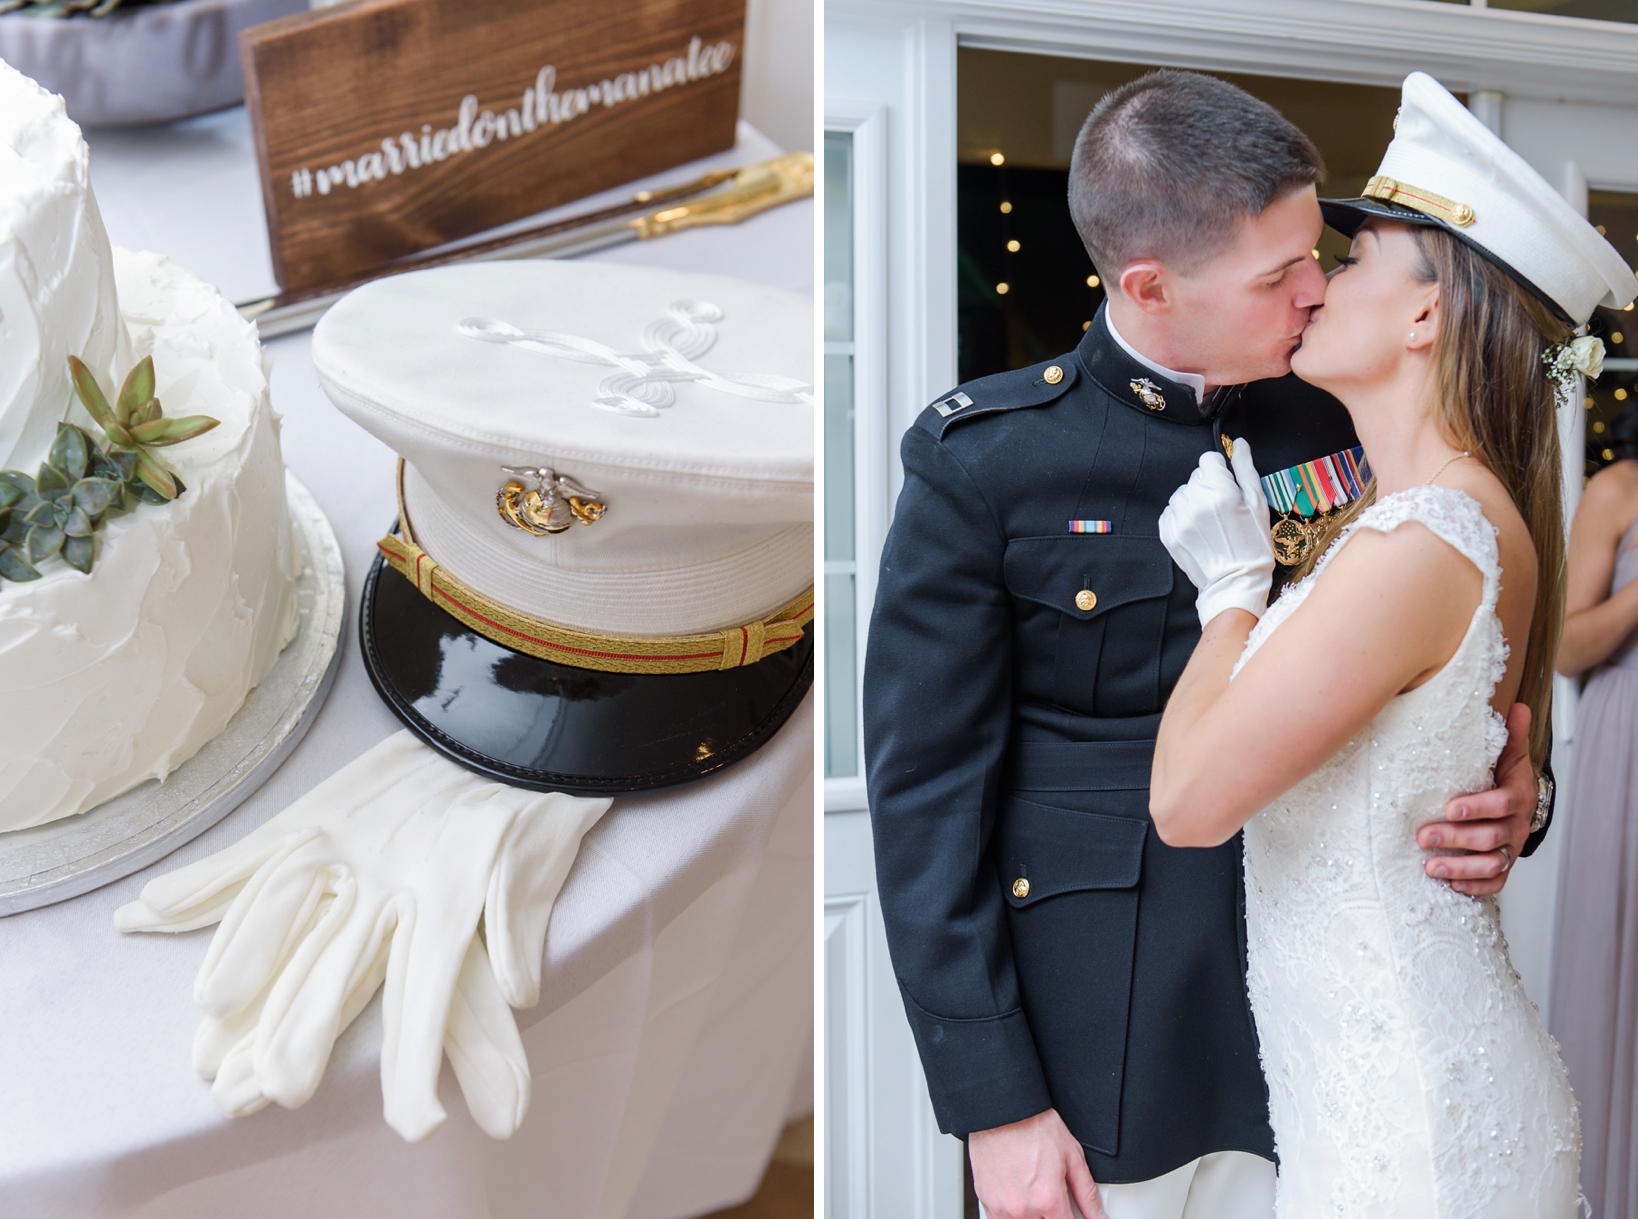 The wedding cake with military details and bride and groom kissing before cutting their cake